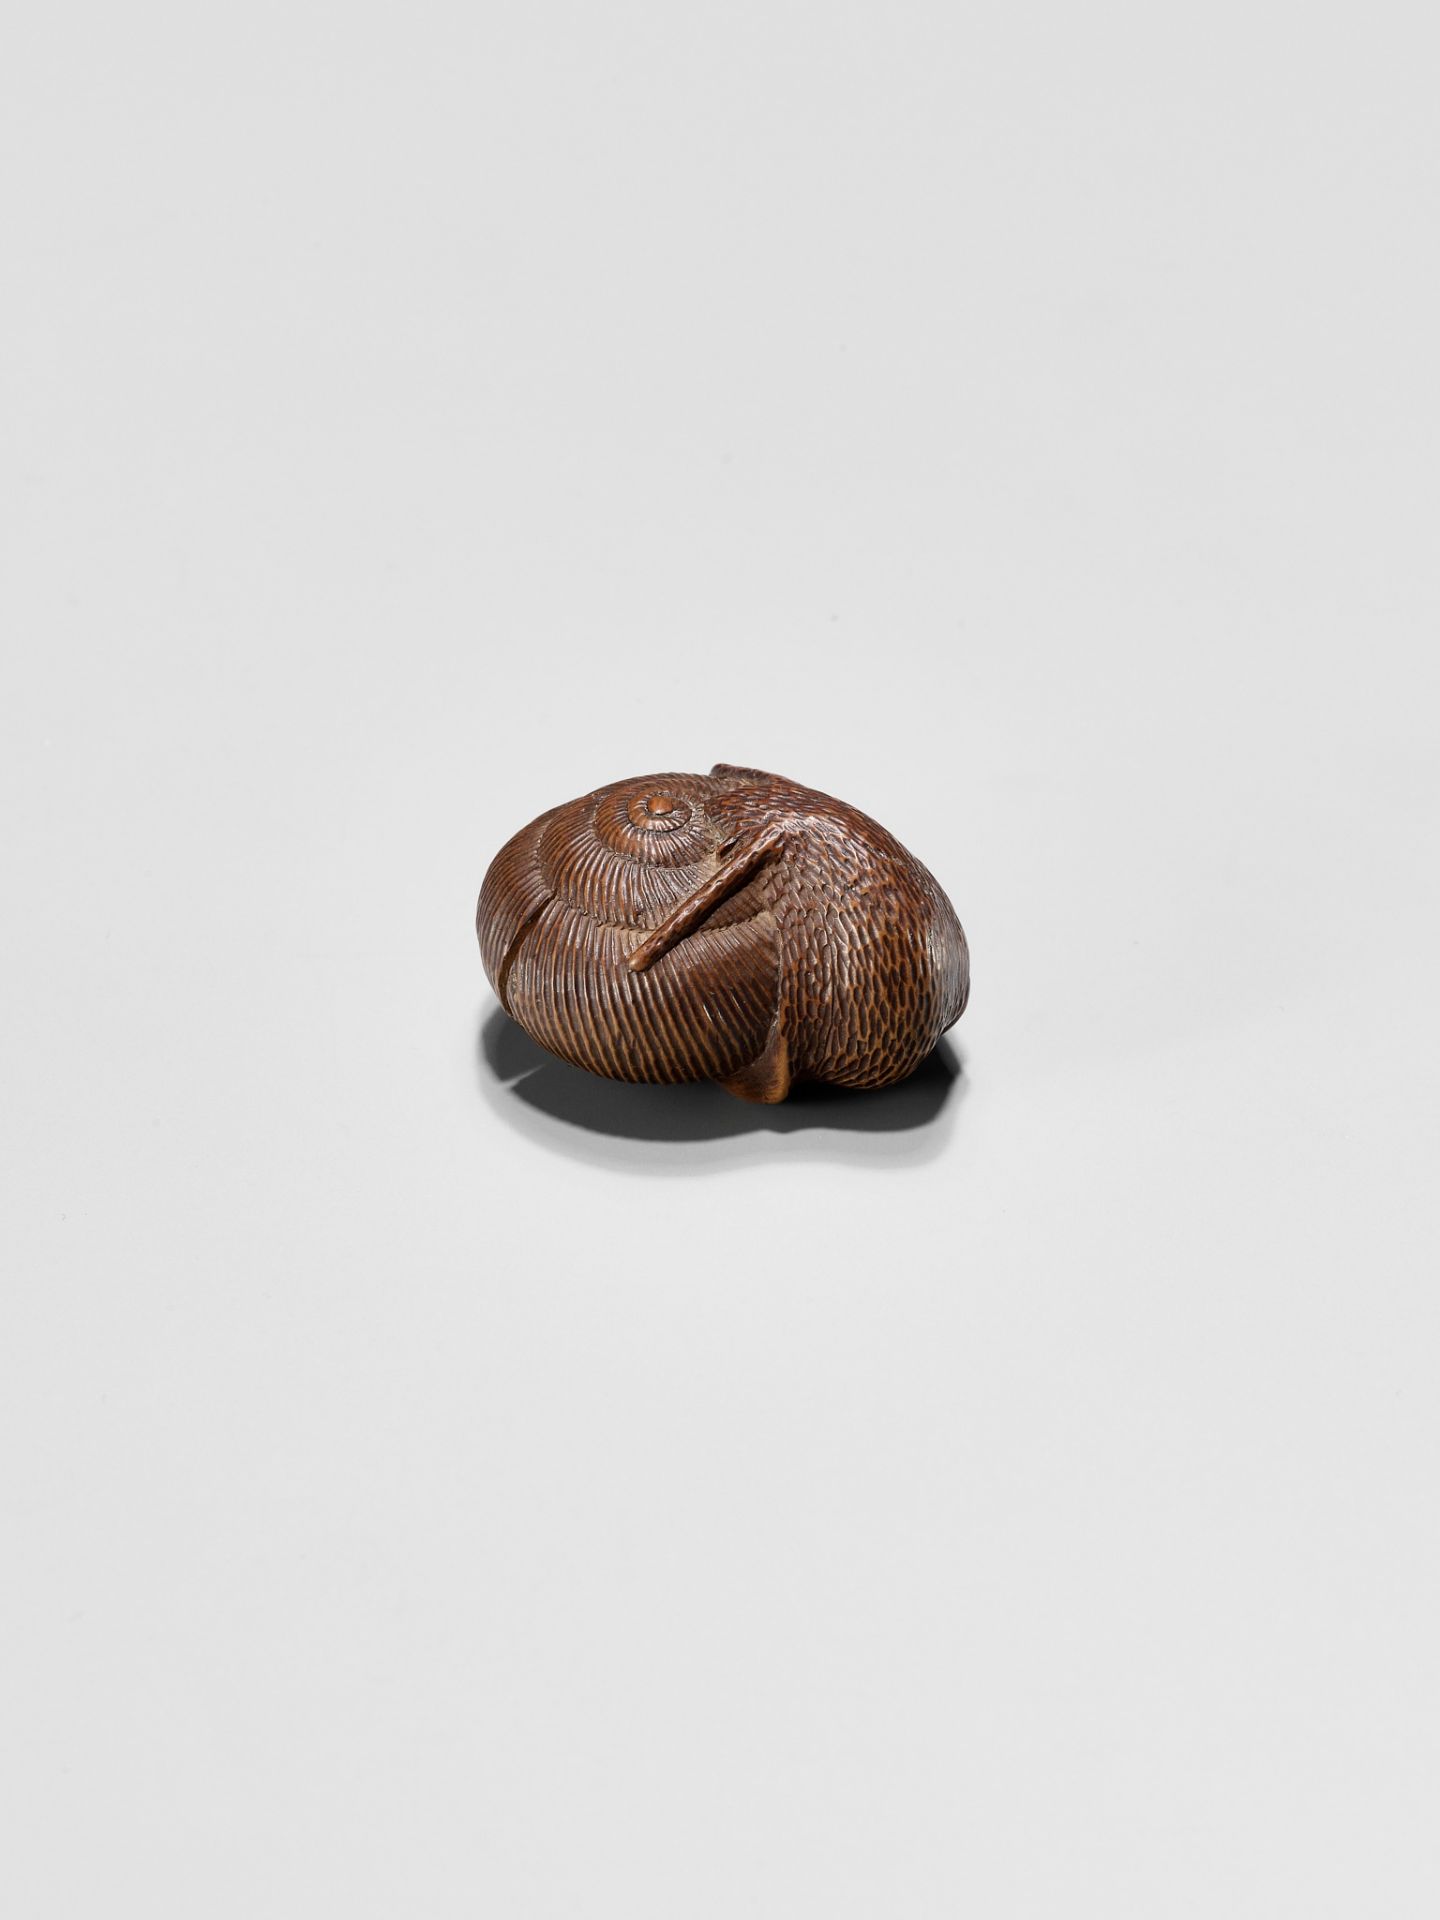 SARI: A FINE WOOD NETSUKE OF A SNAIL EMERGING FROM ITS SHELL - Image 4 of 12